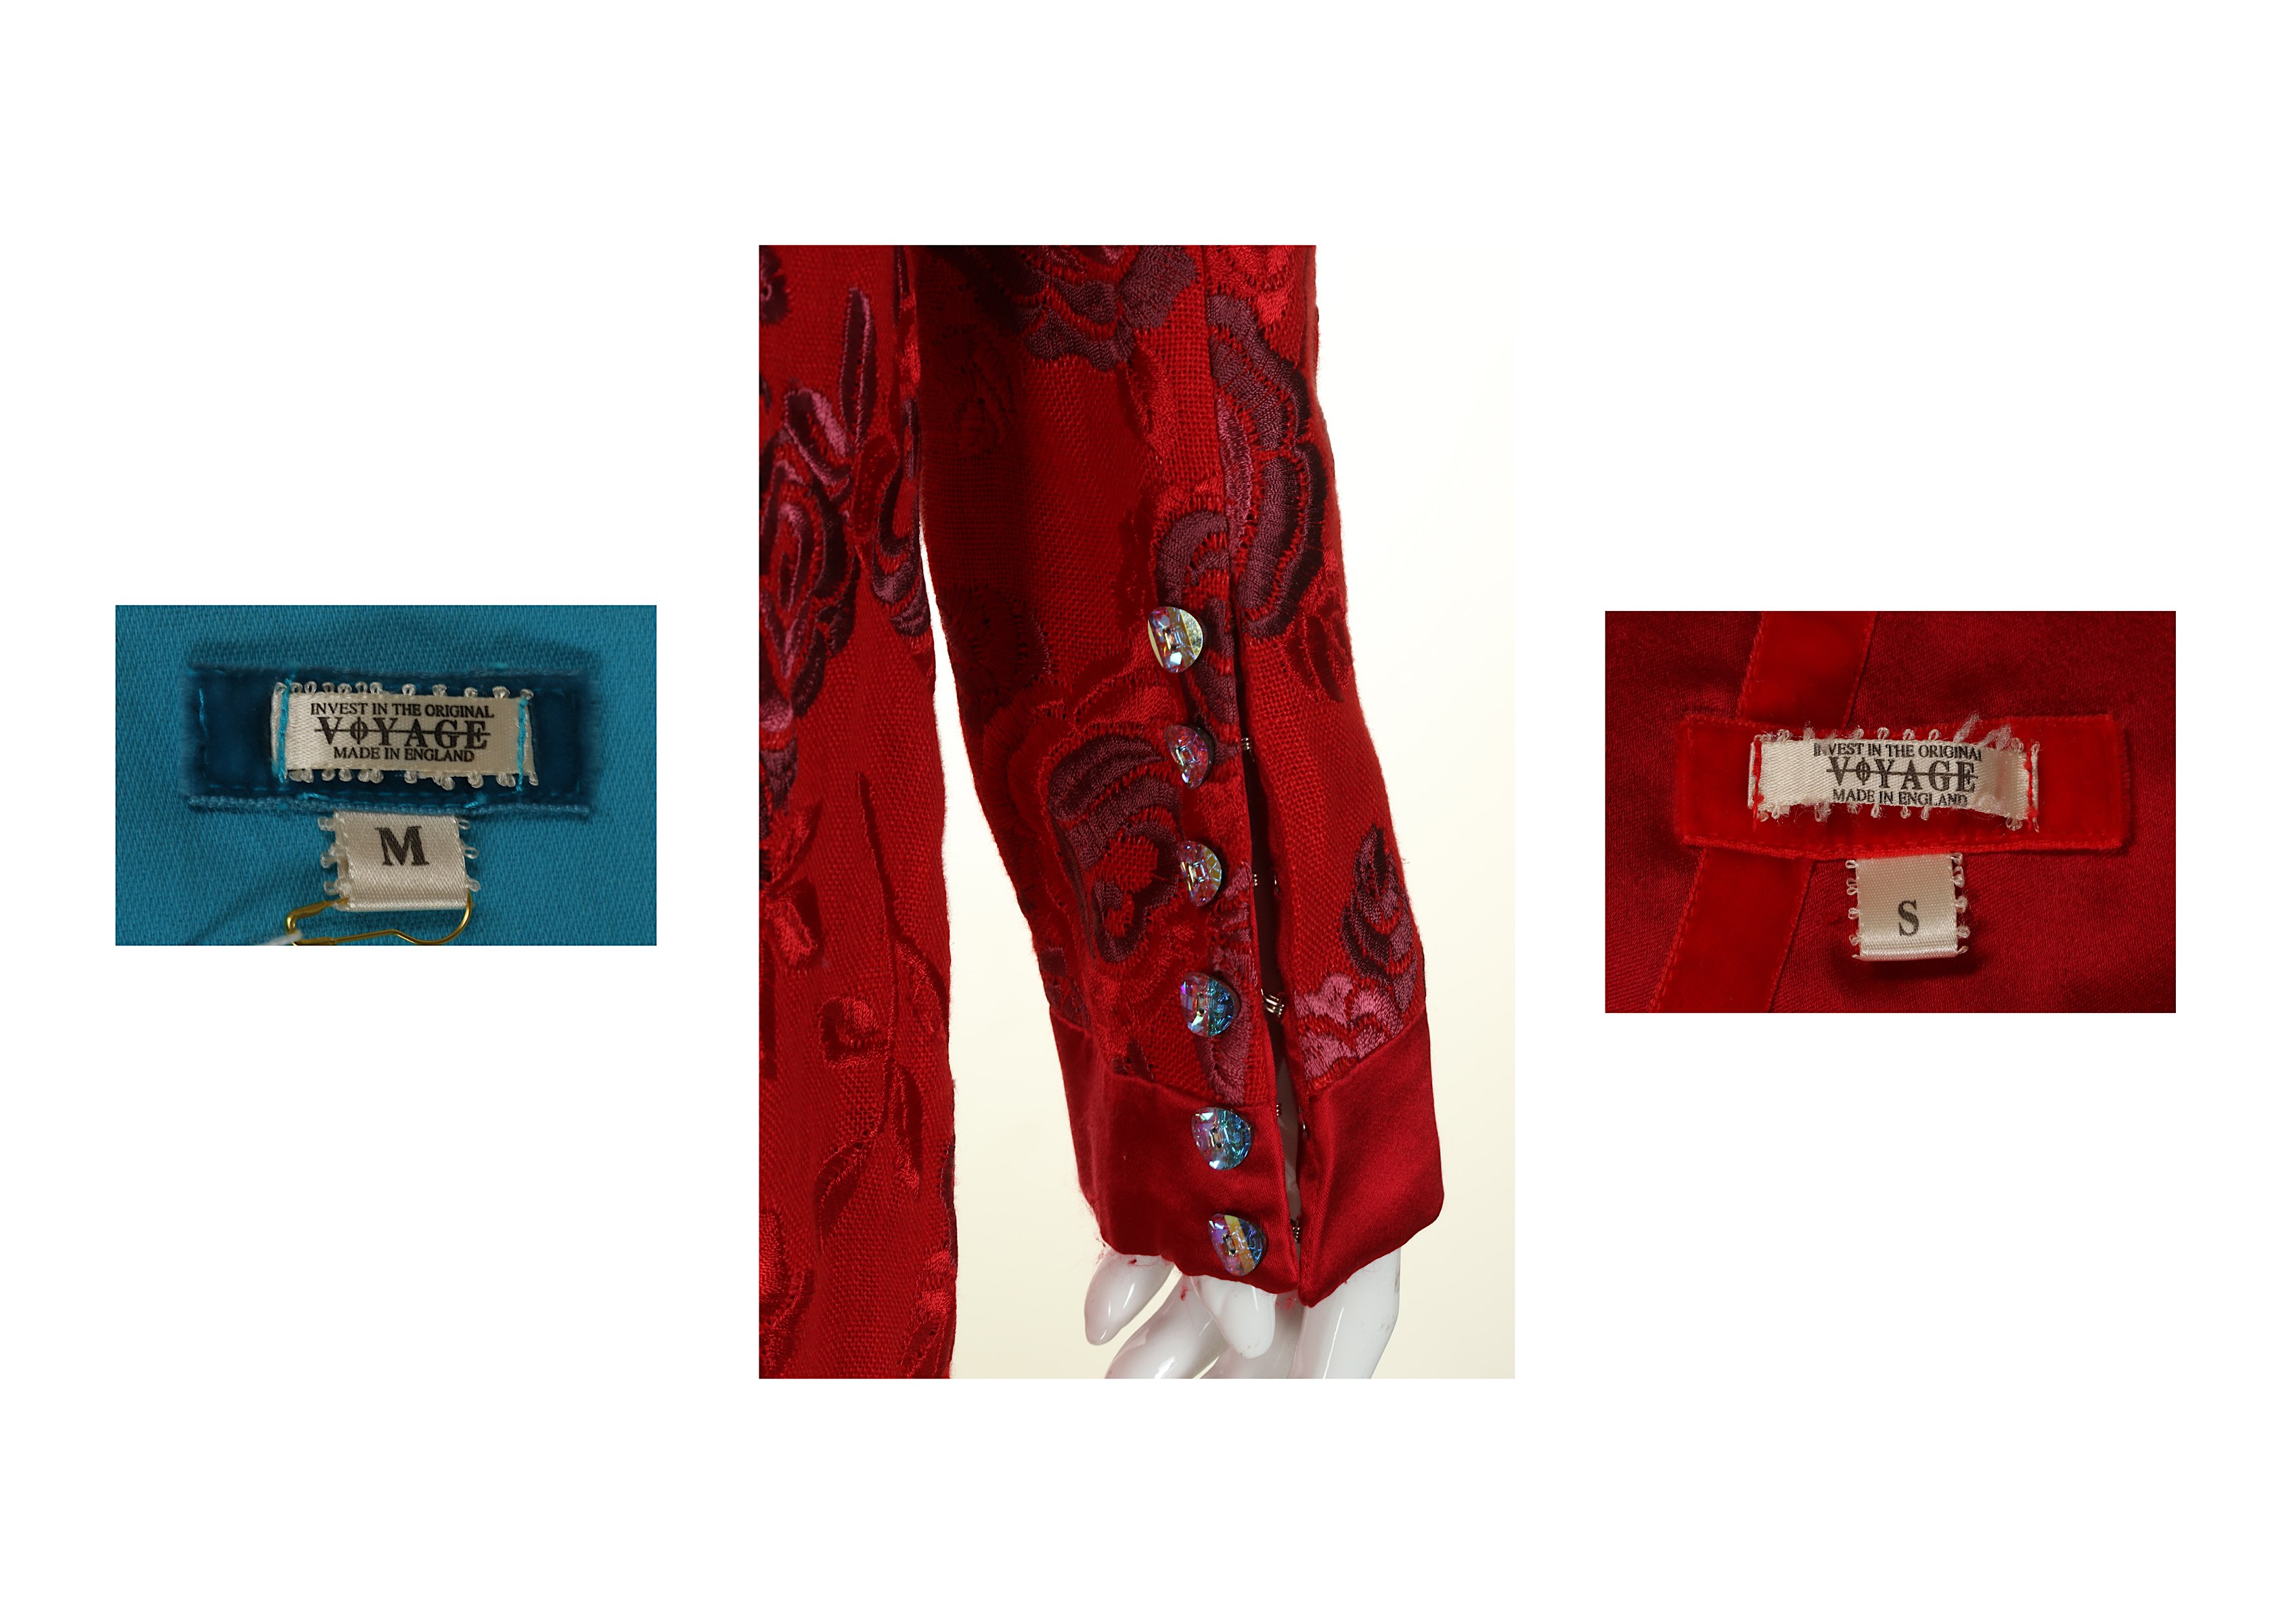 Voyage Blue and Red Ensembles, late 1990s, to include a red dress coat with leather butterfly to - Image 6 of 7